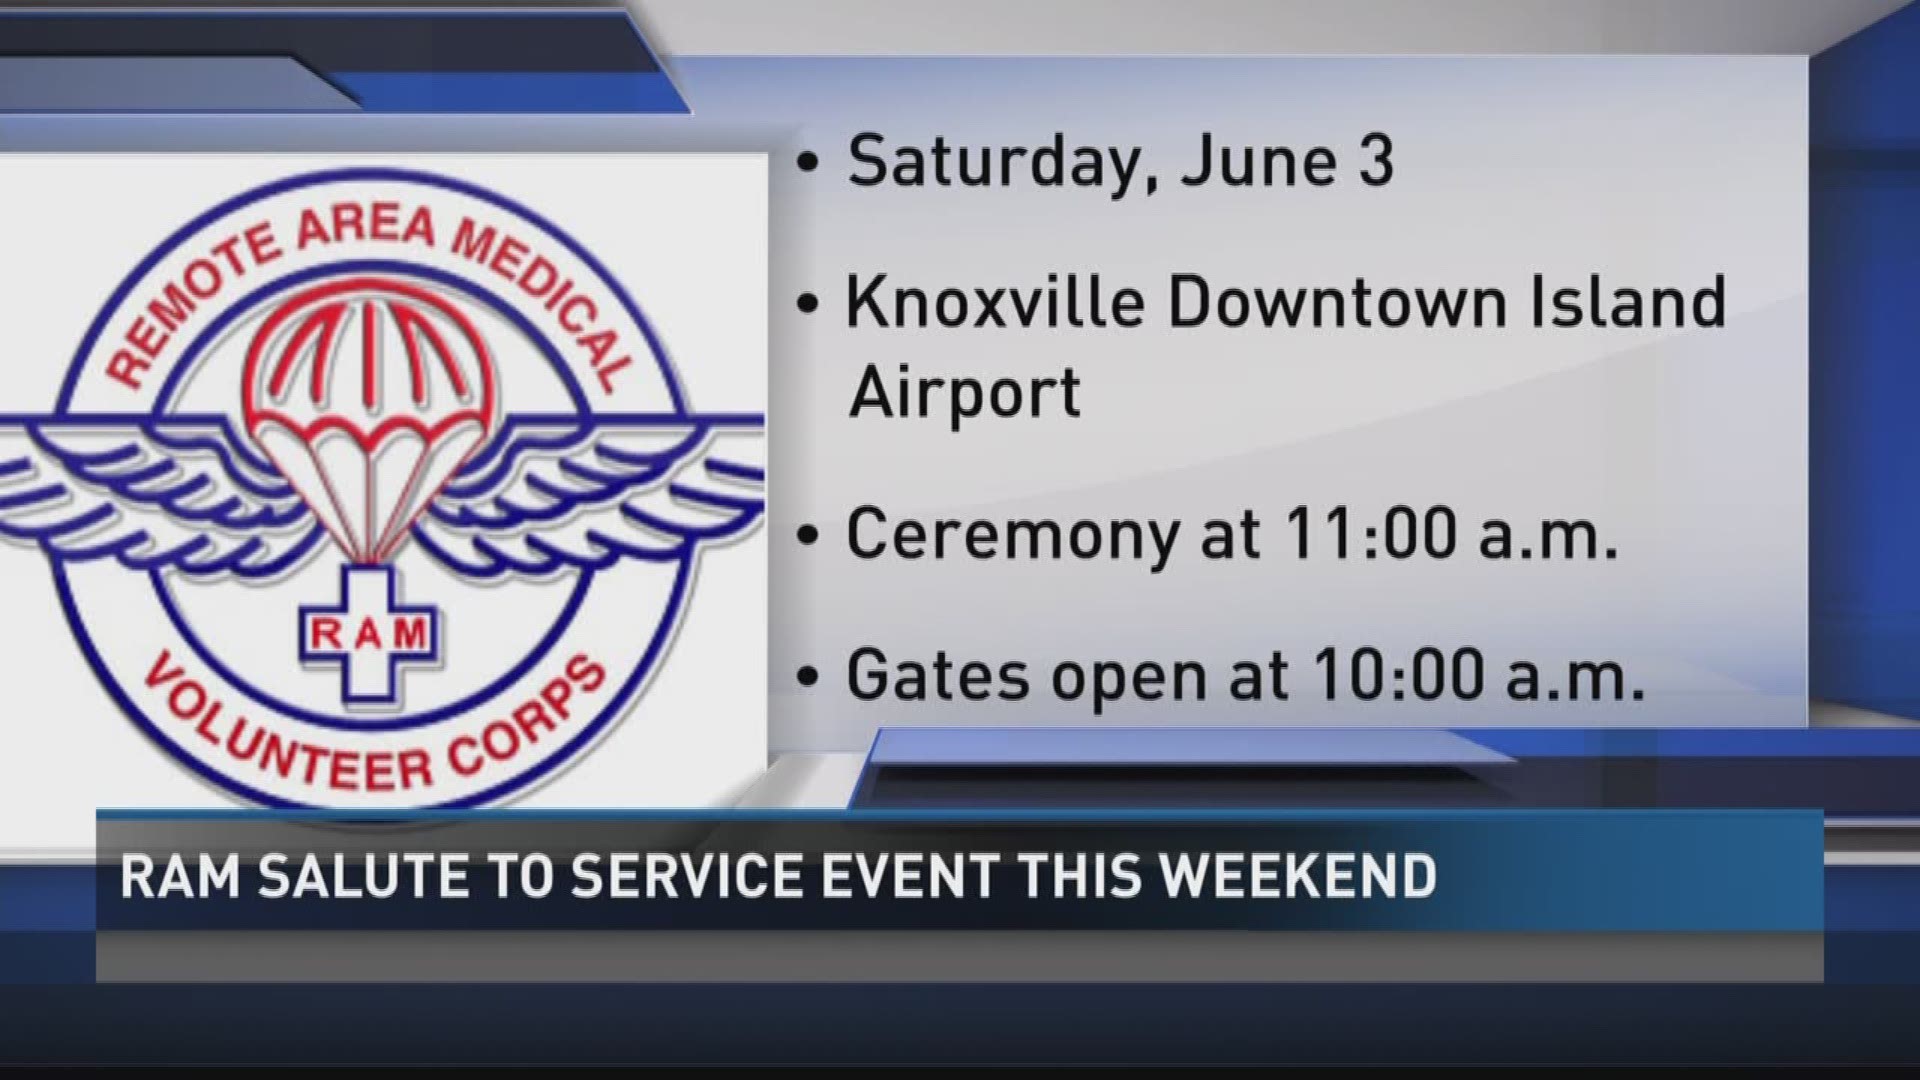 Remote Area Medical honors active service members, Veterans, and their families who have sacrificed for the freedoms we enjoy every day. June 3, 2017 at Downtown Island Airport.11-2 PMPrice: Free